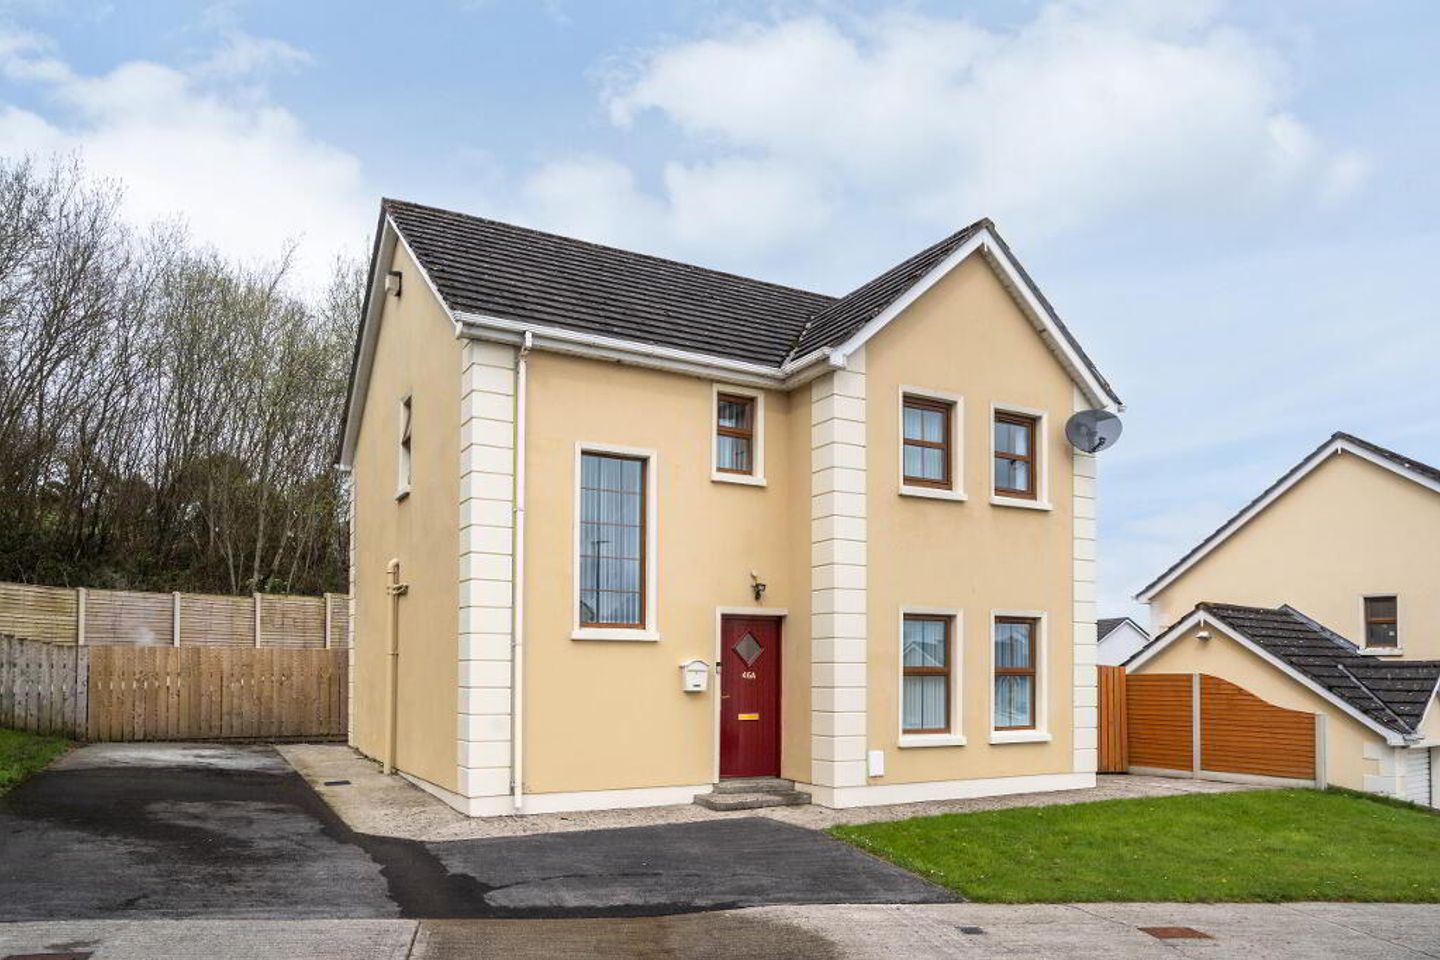 46a Saint Jude's Court, Lifford, Co. Donegal, F93K77F